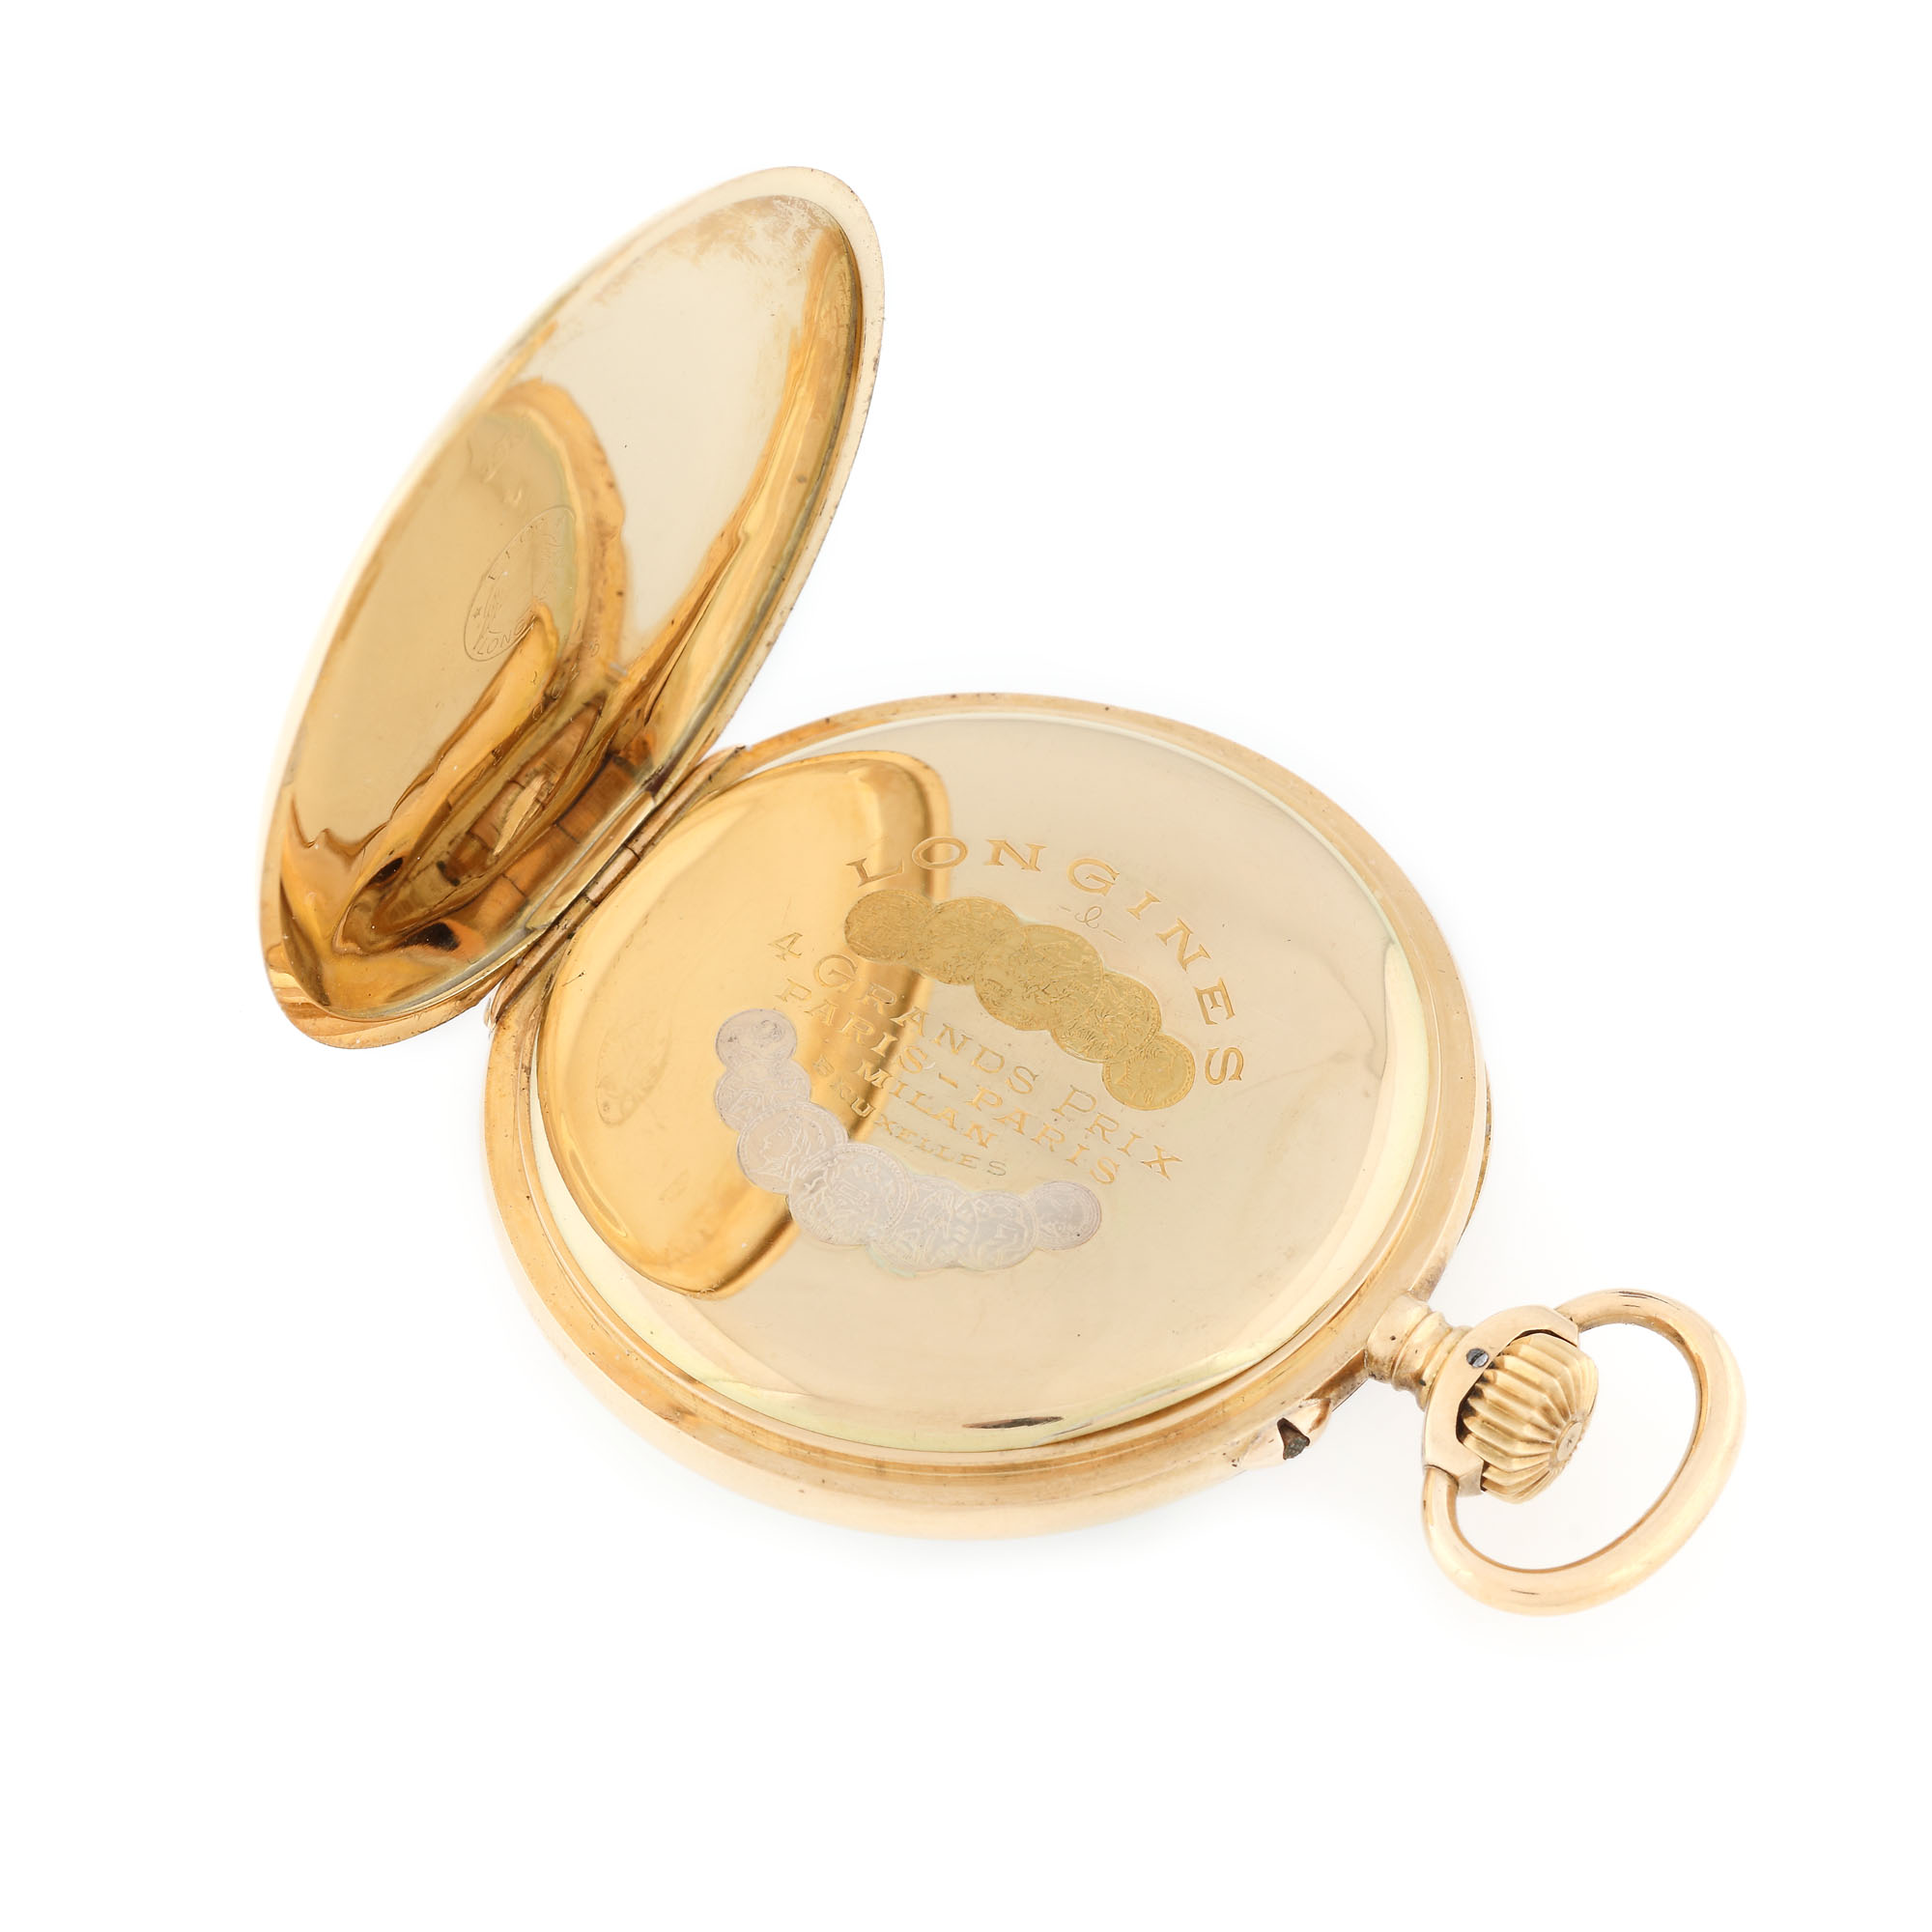 Longines pocket watch, gold, belonged to a prince Ghica - Image 2 of 5